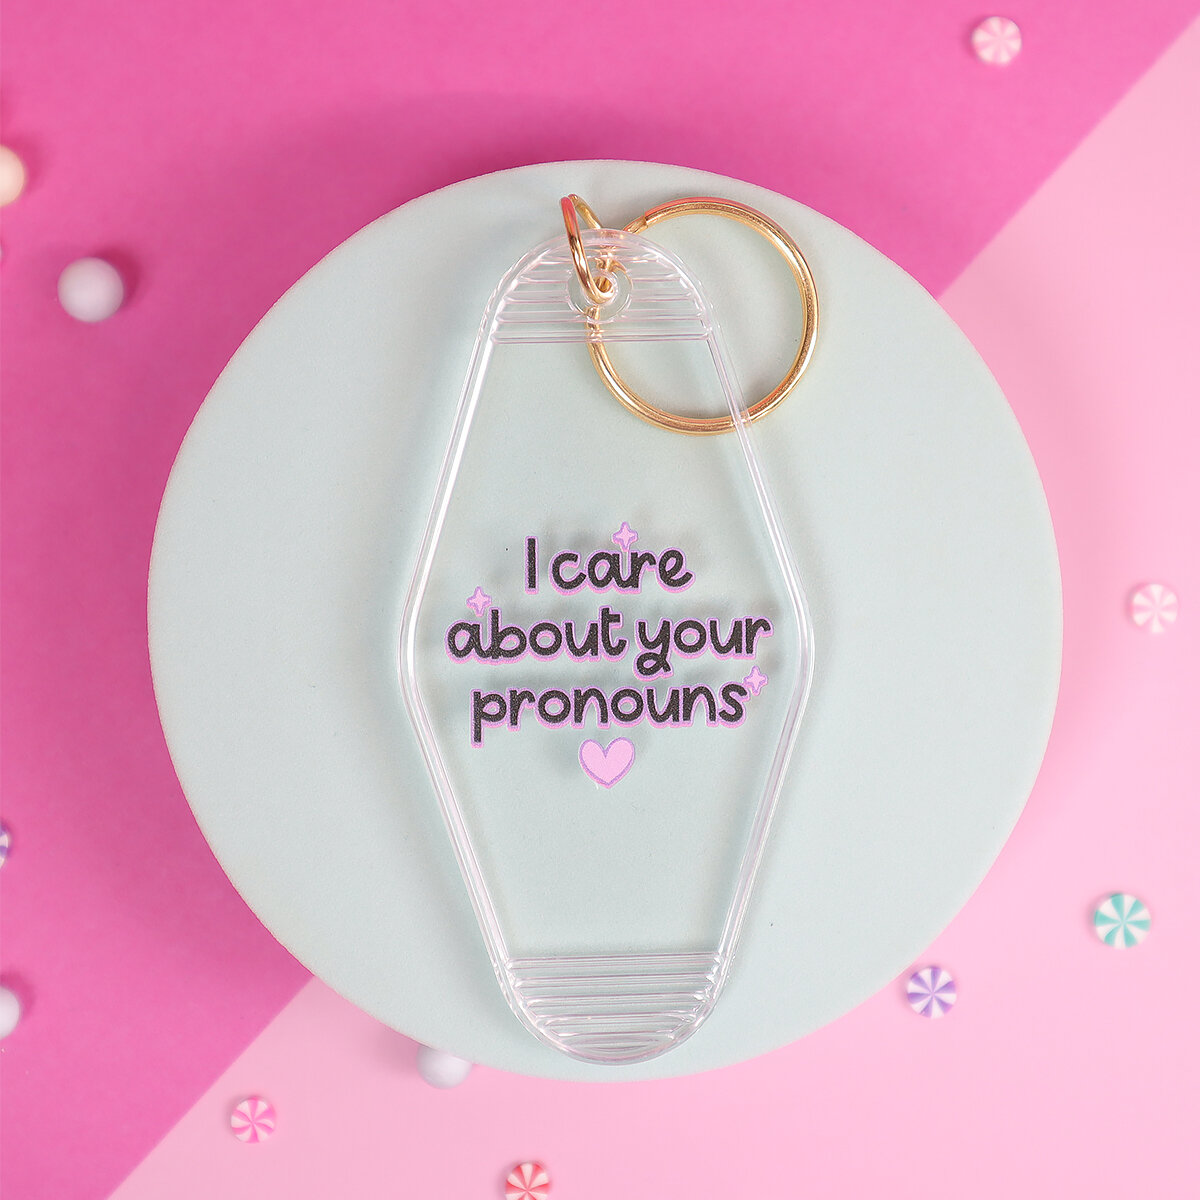 Motel key ring -  Care about your pronouns